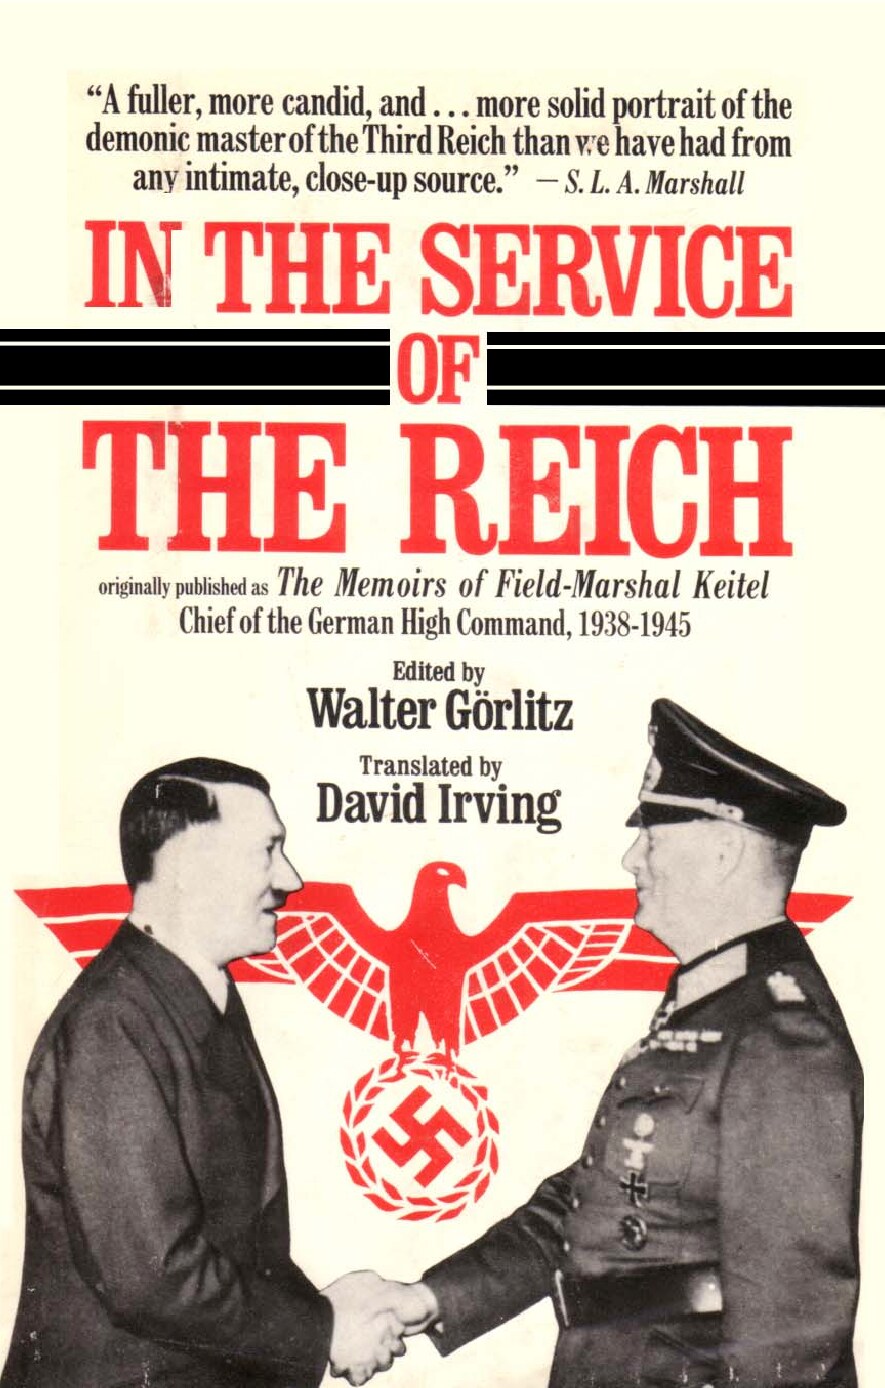 In the Service of the Reich